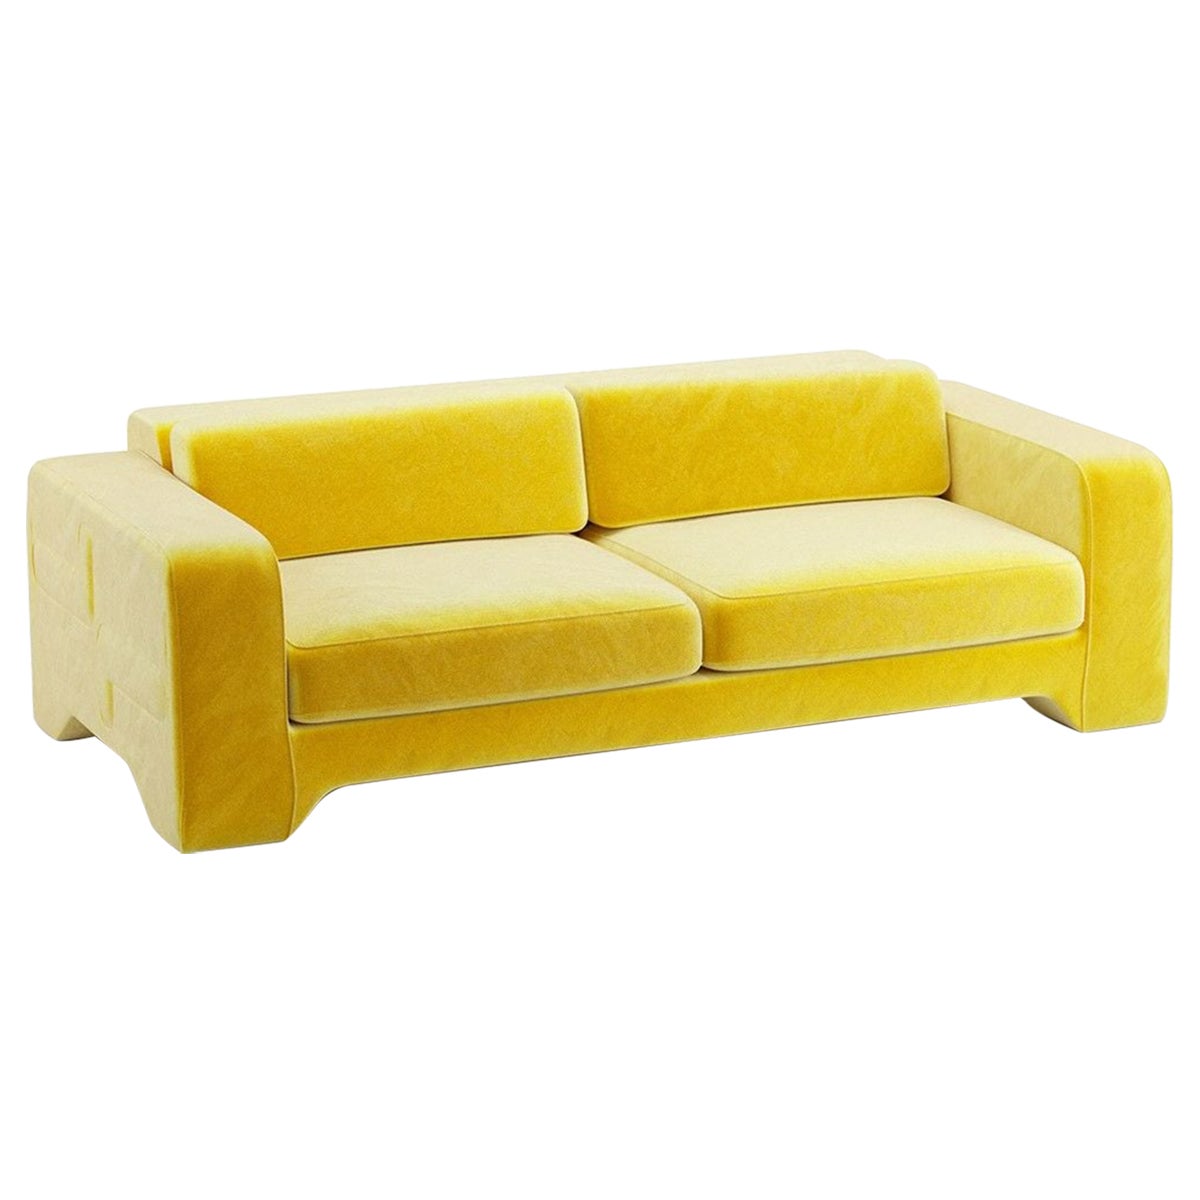 Popus Editions Giovanna 3 Seater Sofa in Yellow Verone Velvet Upholstery For Sale